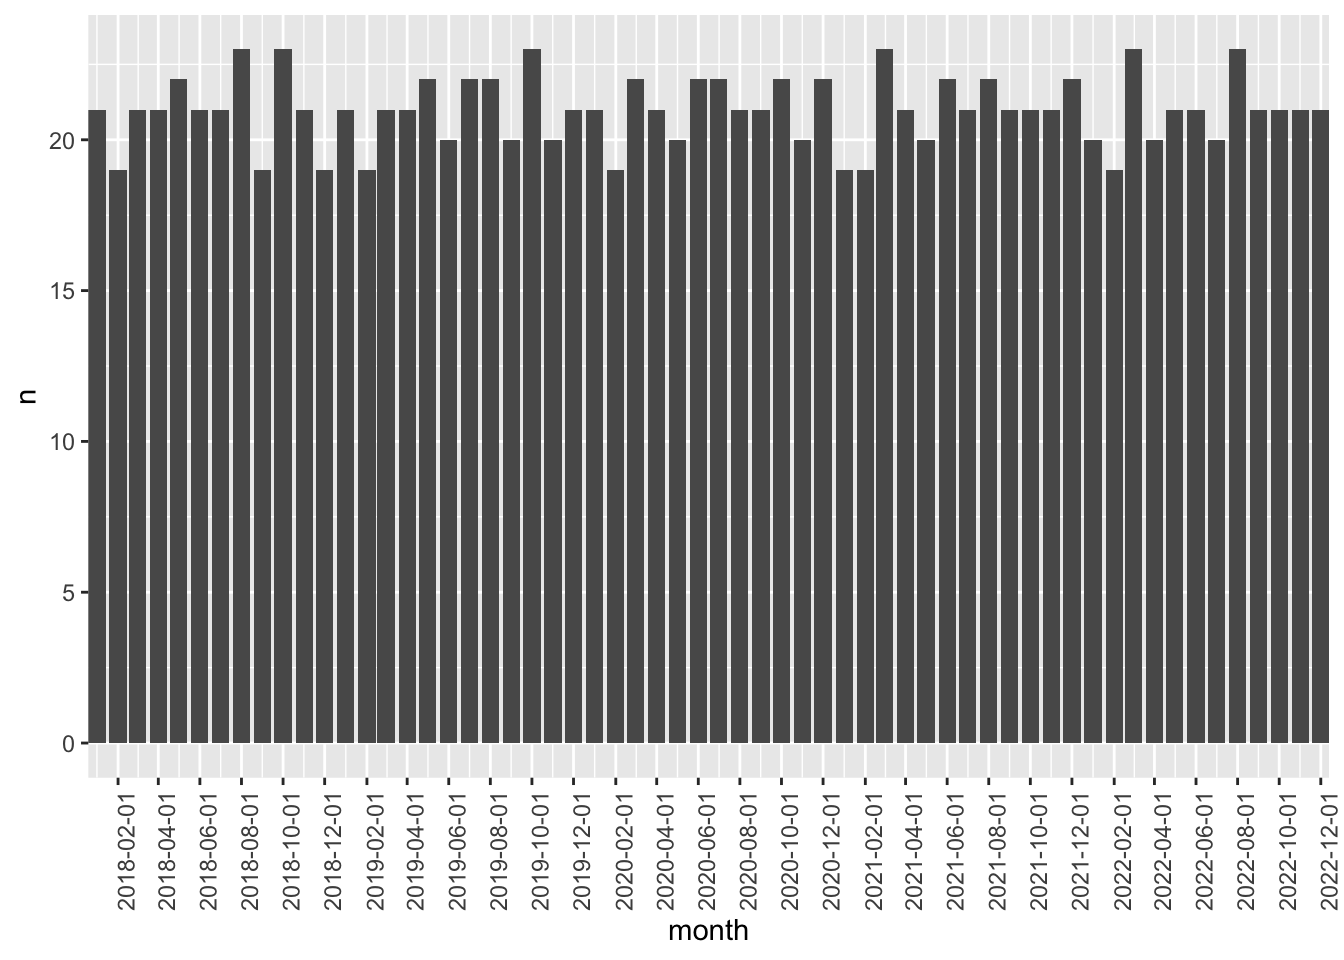 An alternative plot of the number of observations on the CRSP daily stock file by month for years 2018 through 2022. Values fluctuate from 19 to 23 and have no apparent trend over time. Plot of part of an exercise assigned to students to relate what is shown to the underlying data.